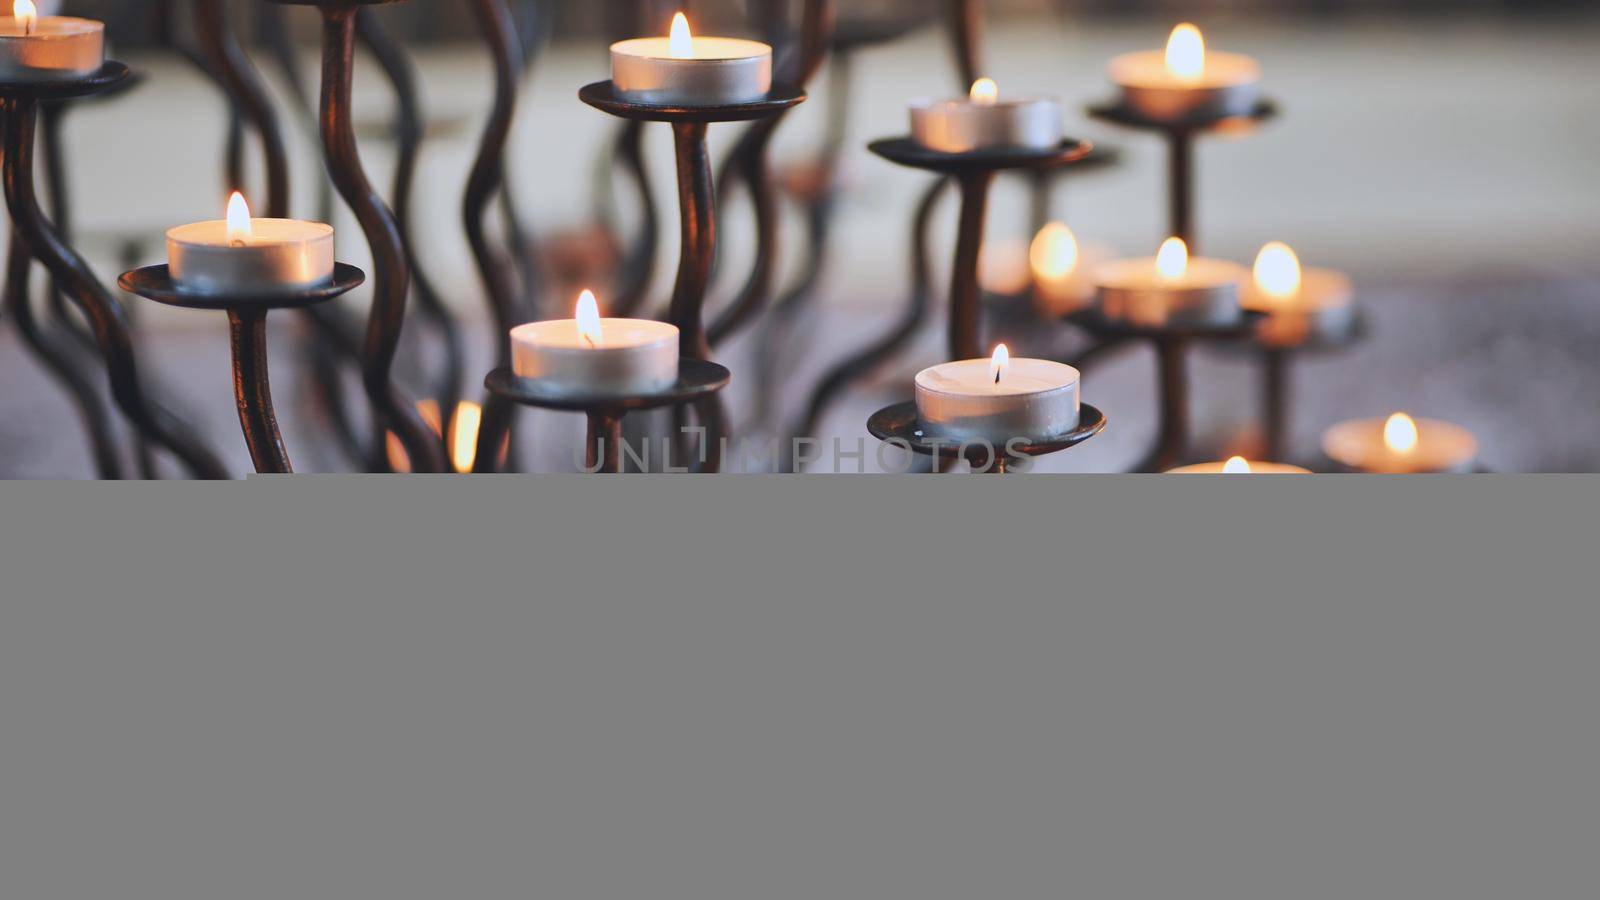 Candlestick holder with burning candles in a Catholic church